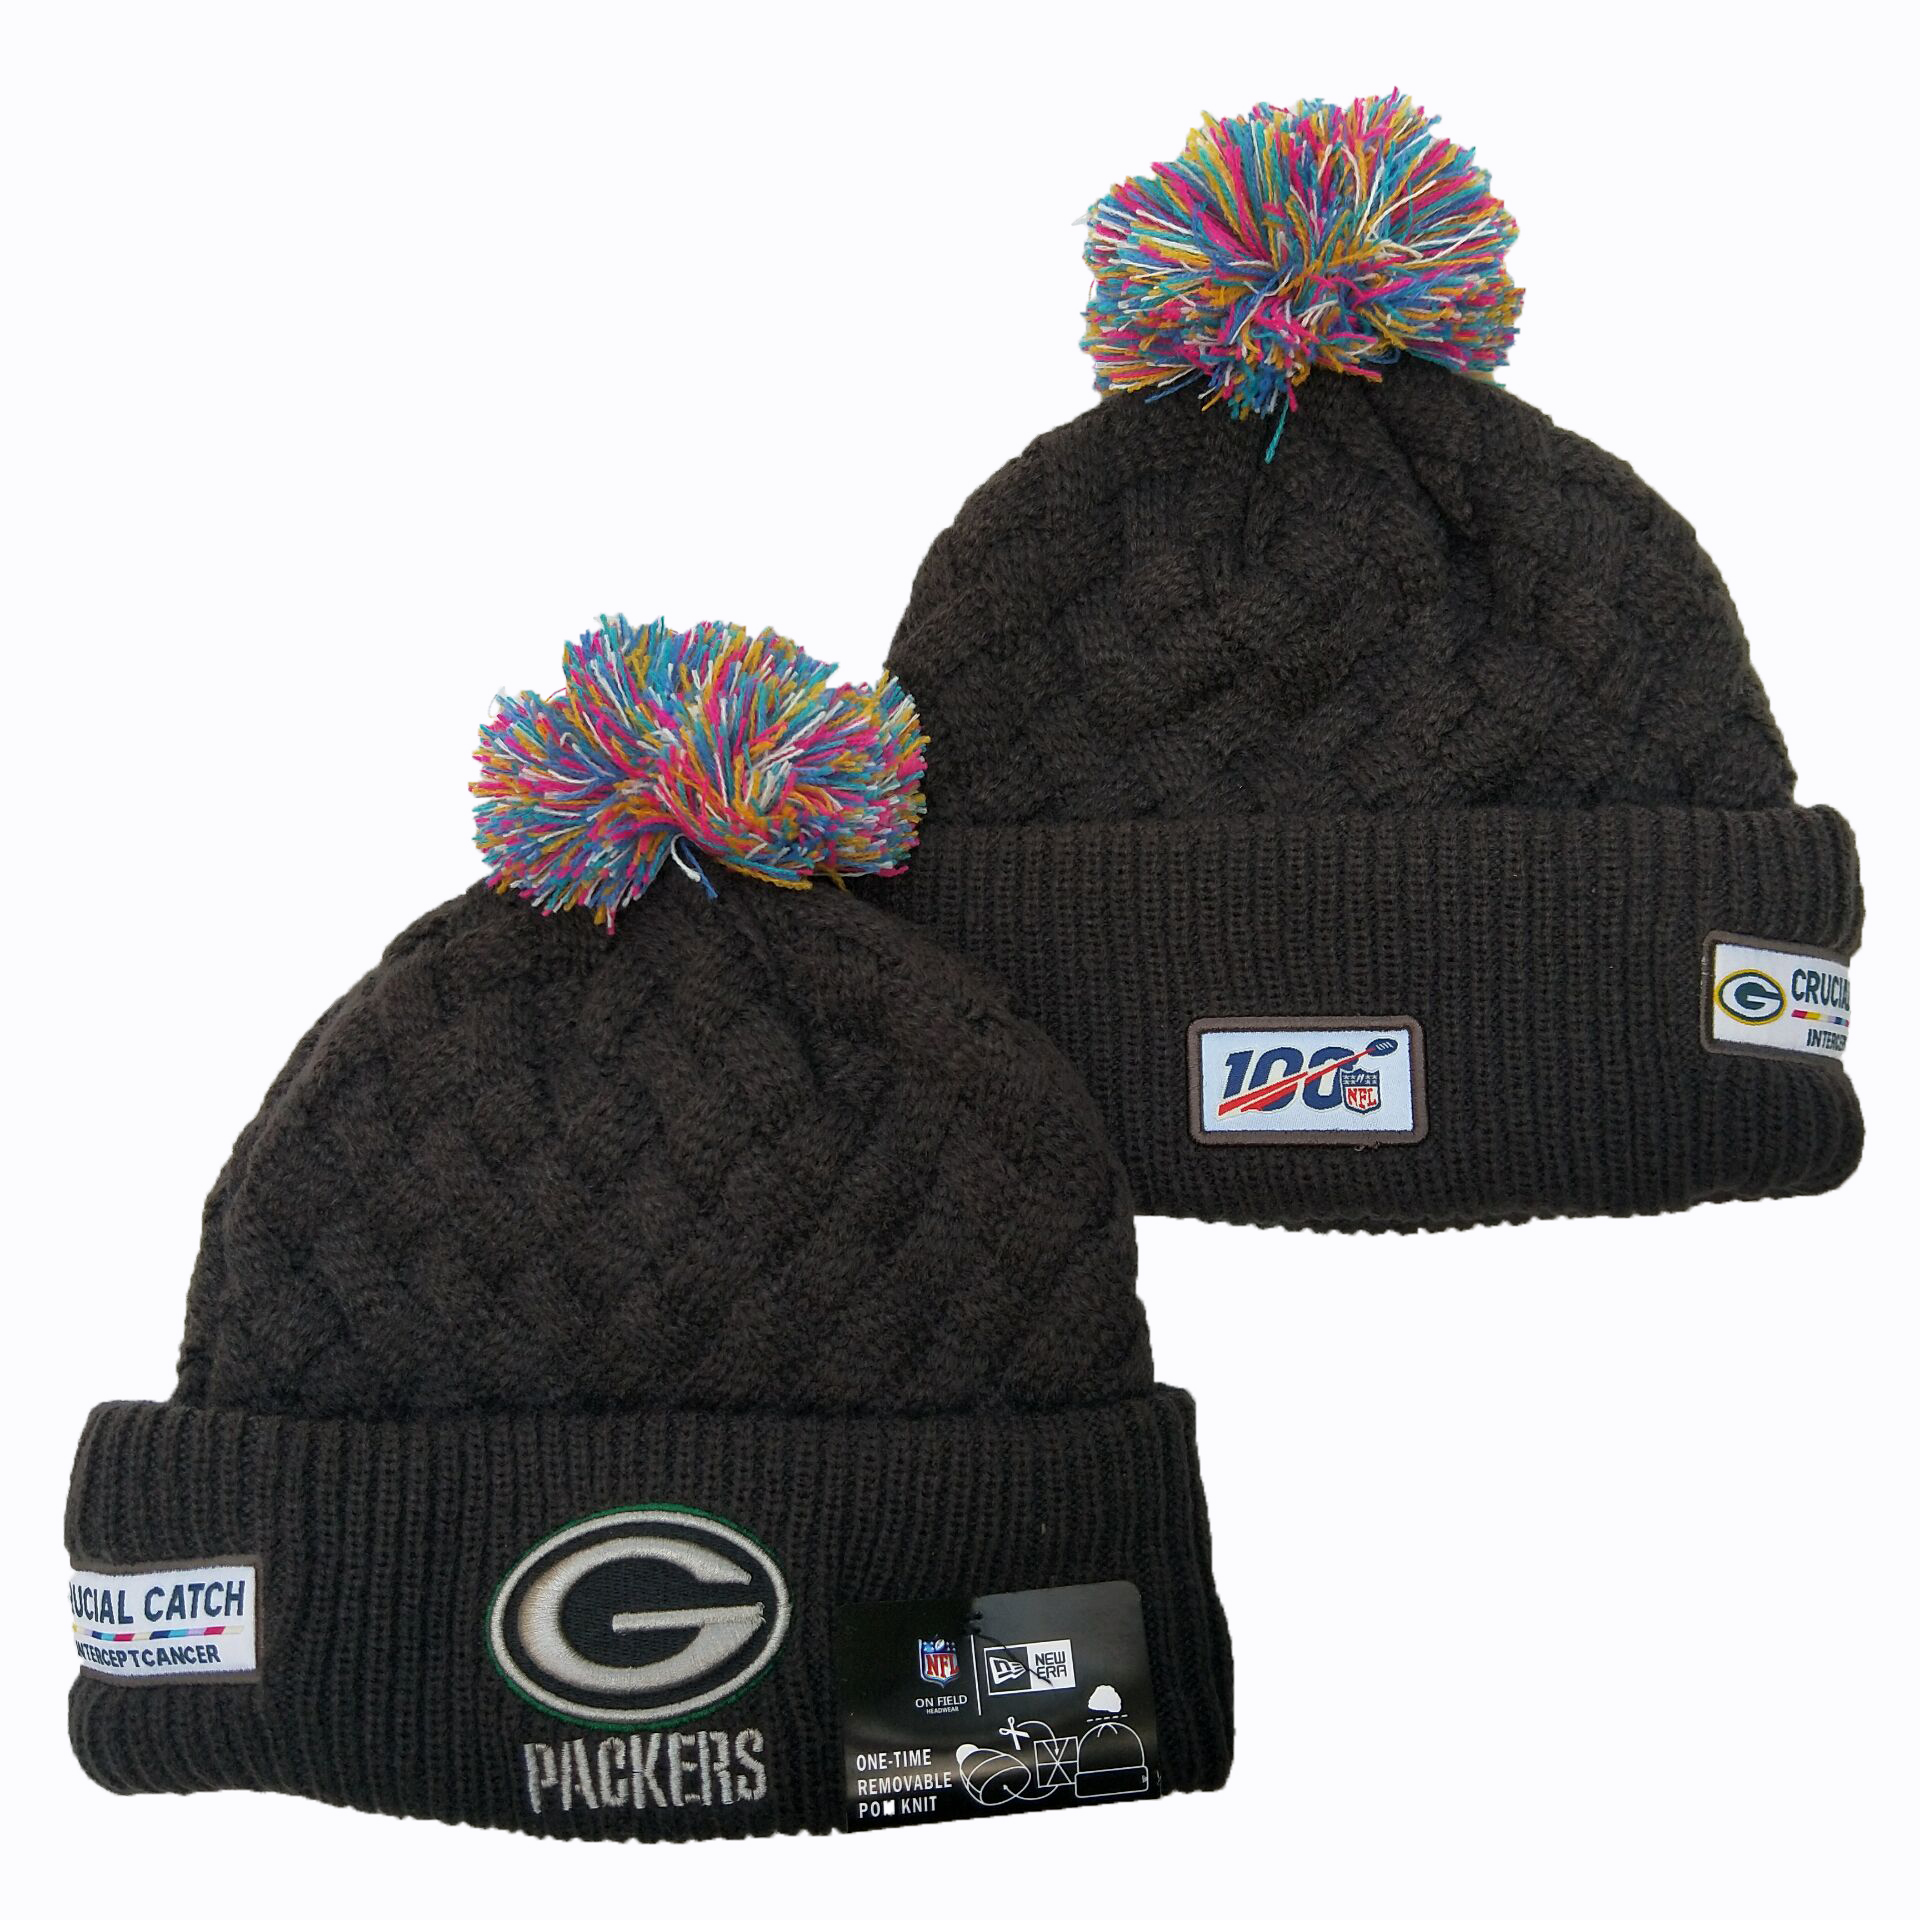 Green Bay Packers knit Hats 071